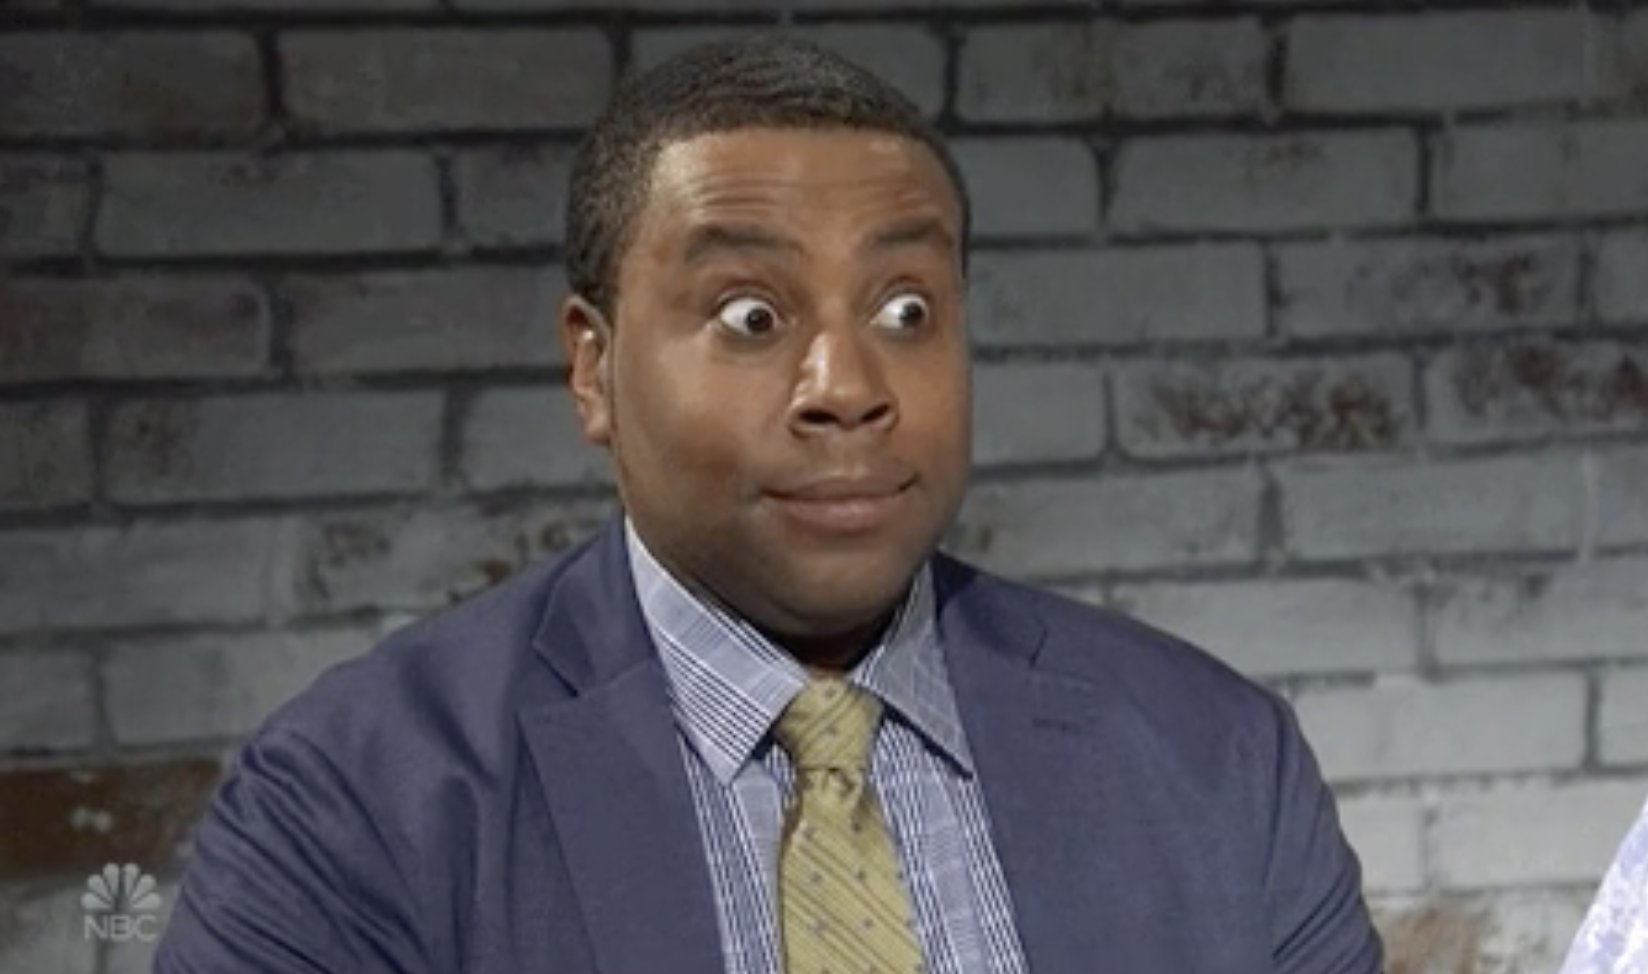 Kenan with a surprised look on his face